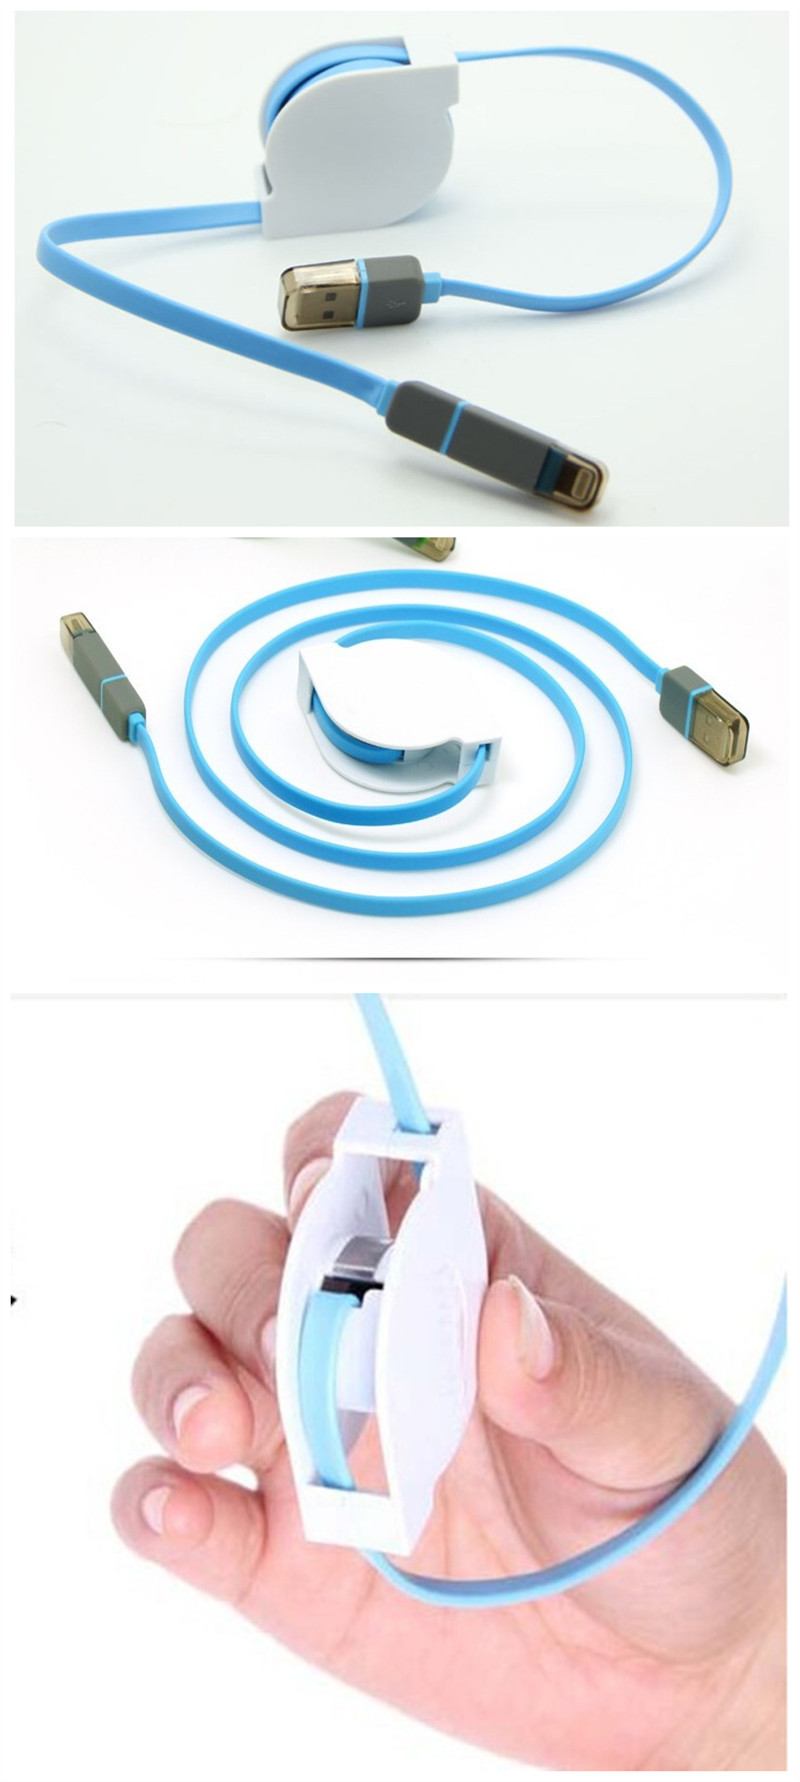 Retractable 2in1 Mobile Phone Cables For iPhone 5 5S 6 Charger ios Stretch Data Micro USB Cable For Samsung Galaxy S3 S4 S6